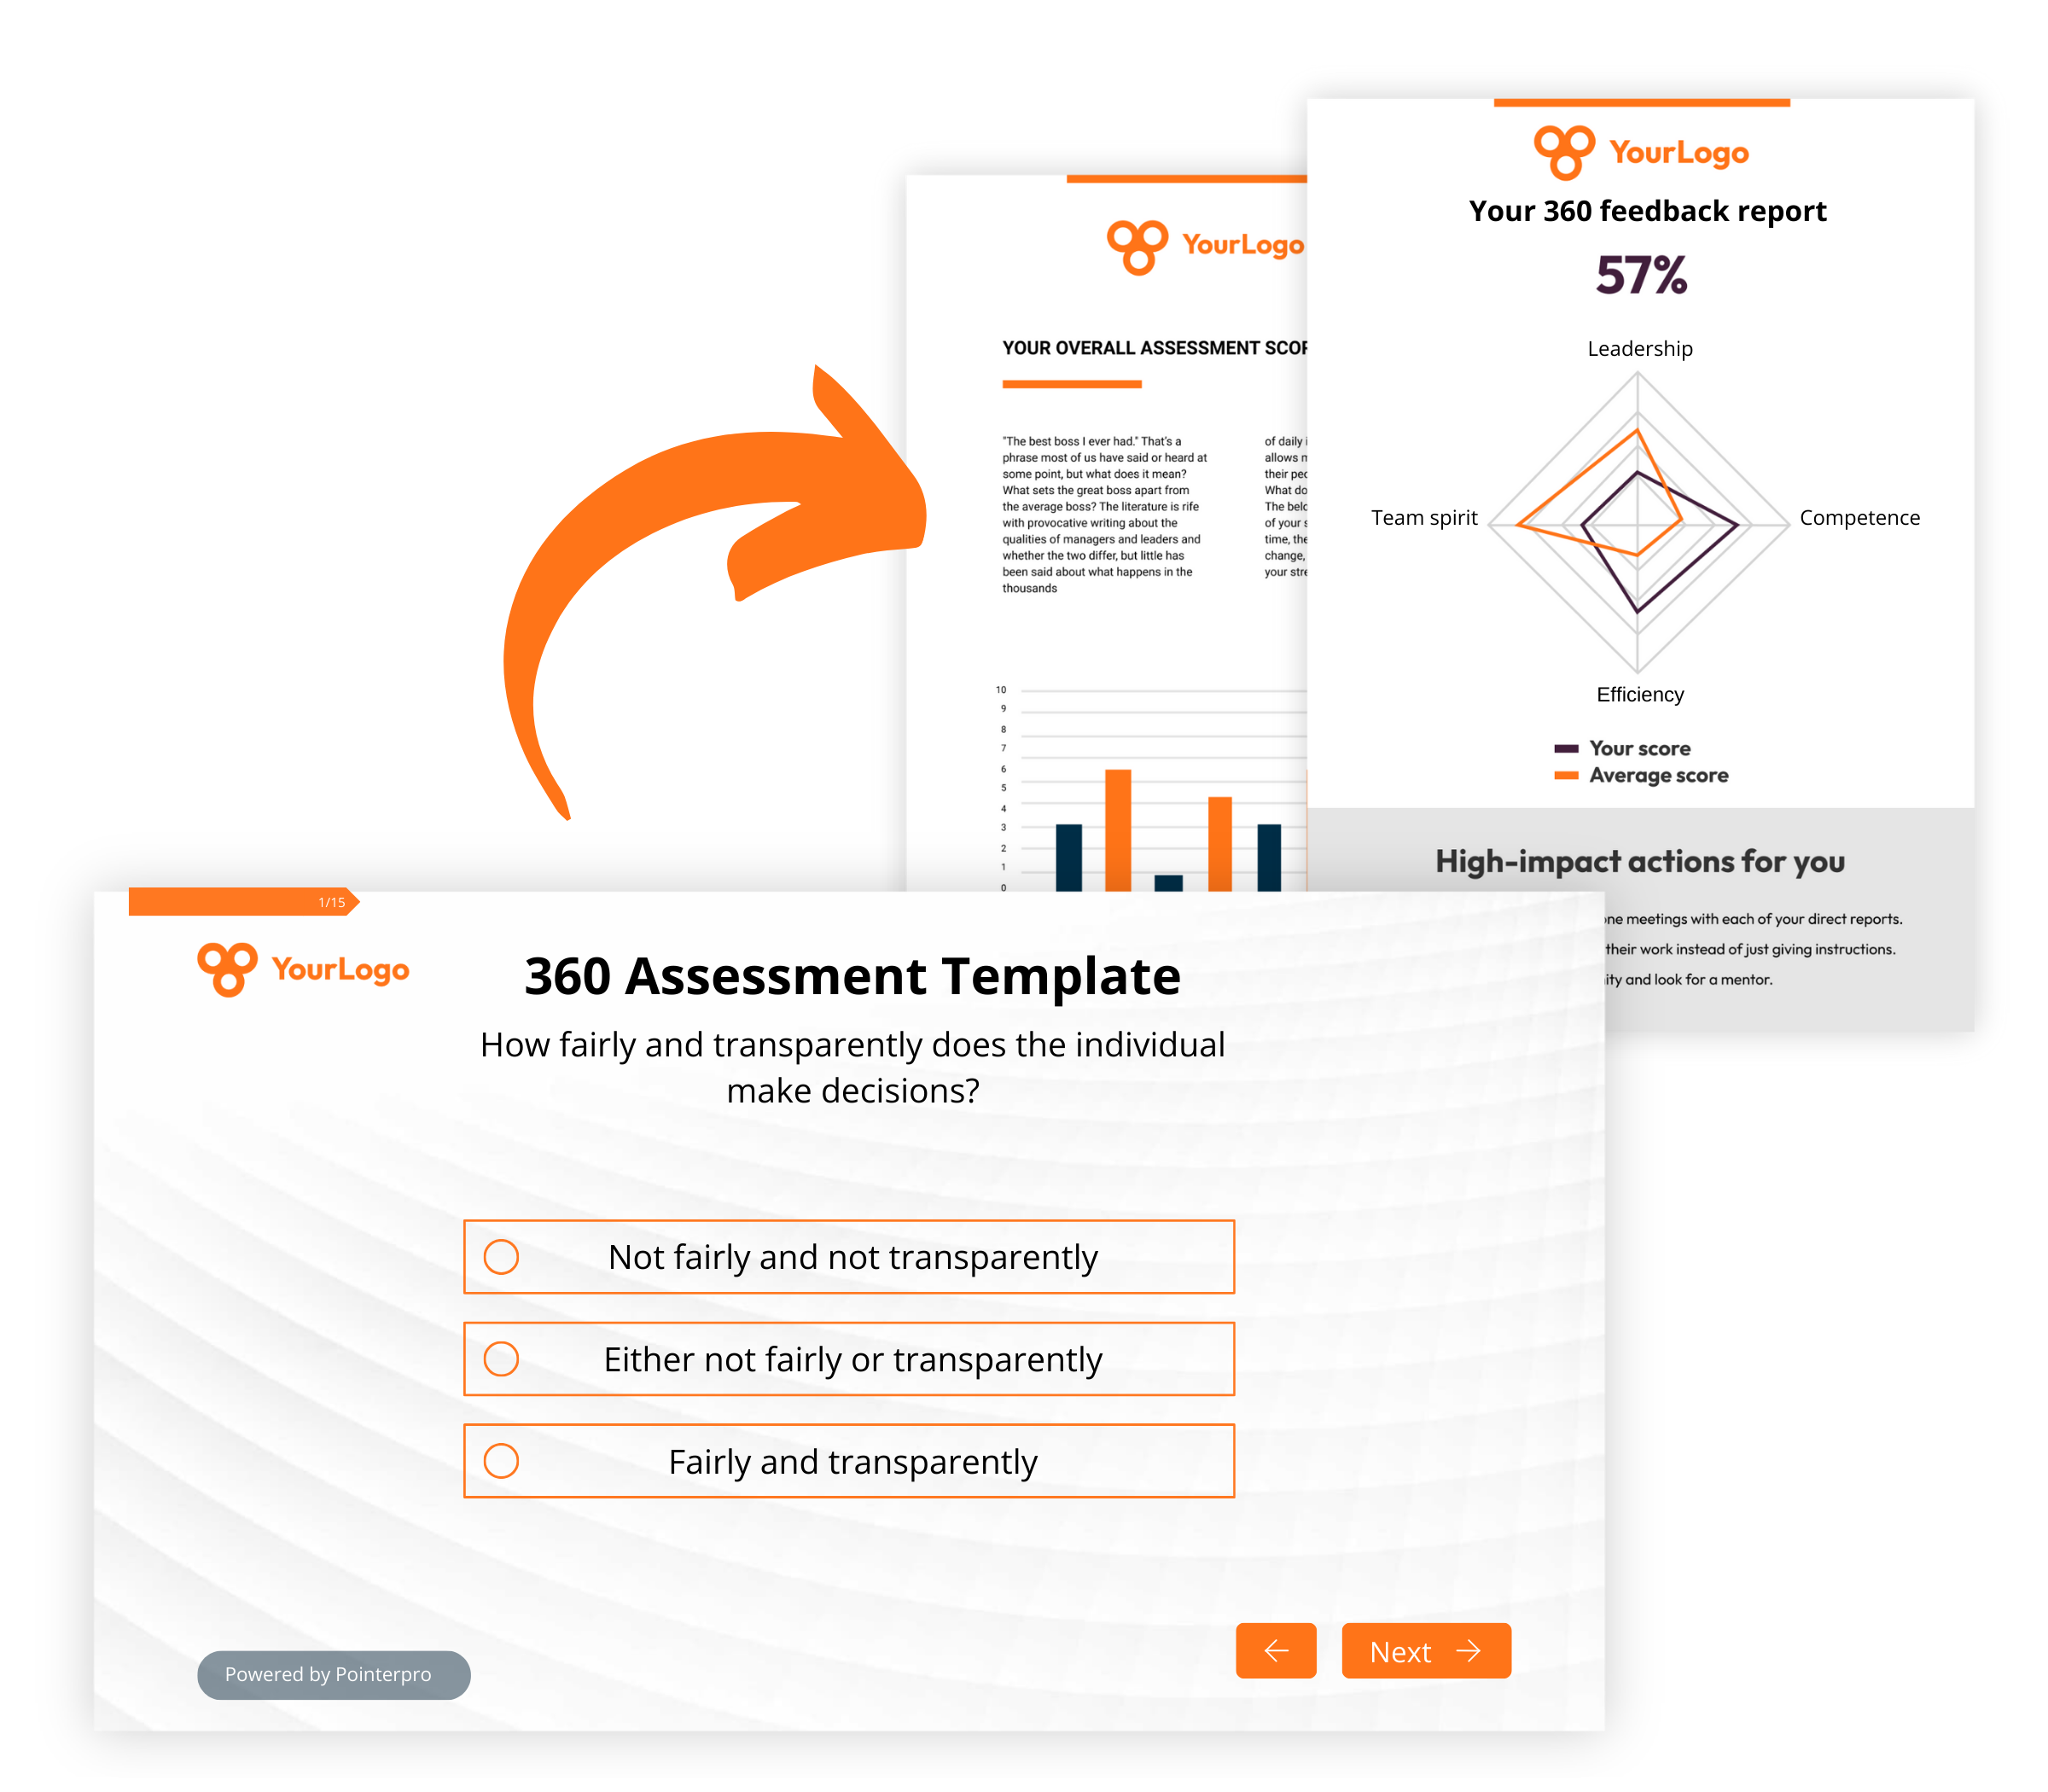 An example of a 360 assessment template question and personalized feedback report